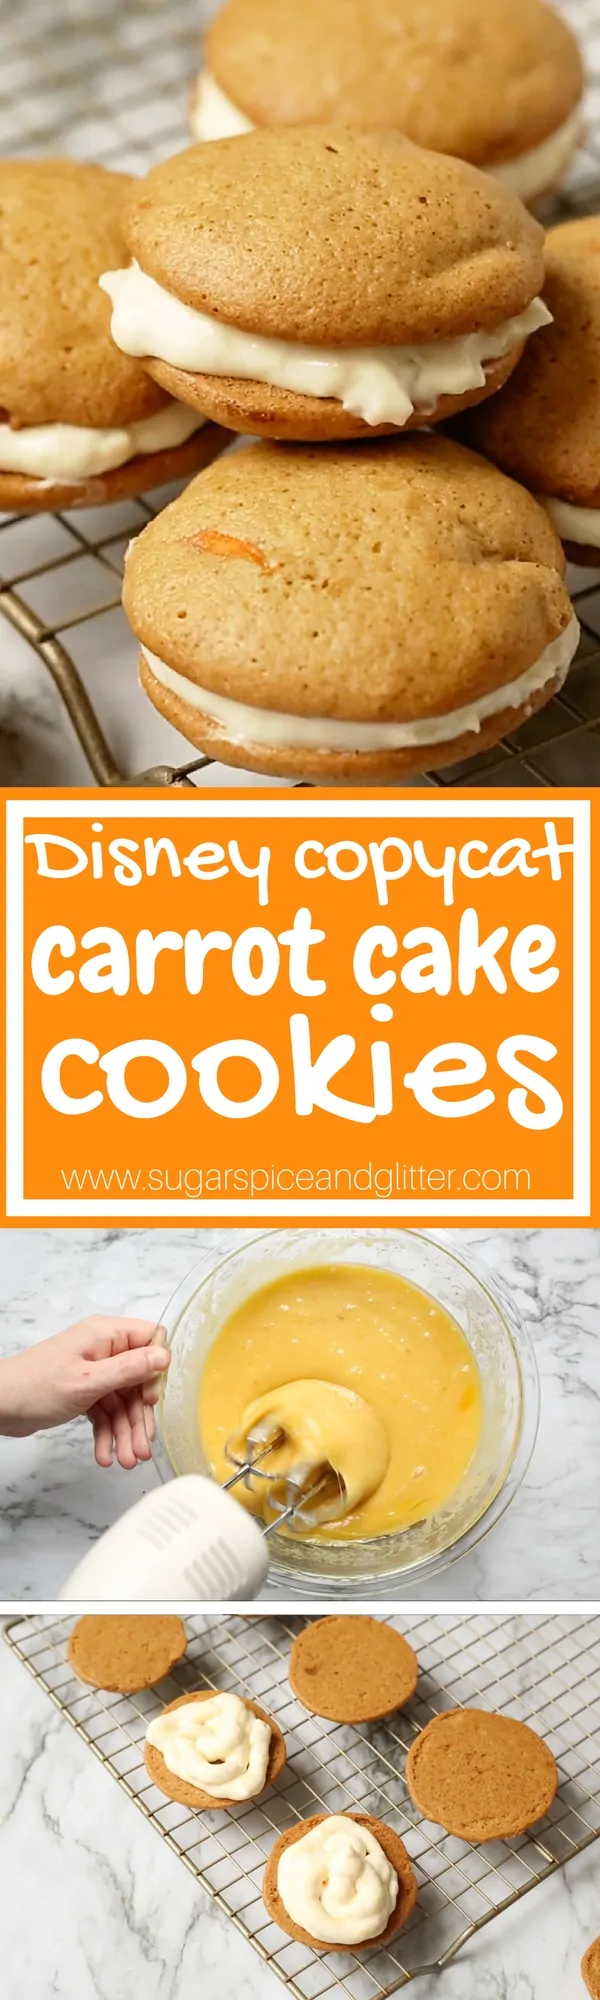 The perfect recipe for Carrot Cake Cookies, a fun Easter dessert or Disney movie night treat - after all, they are inspired by the Disneyworld recipe!